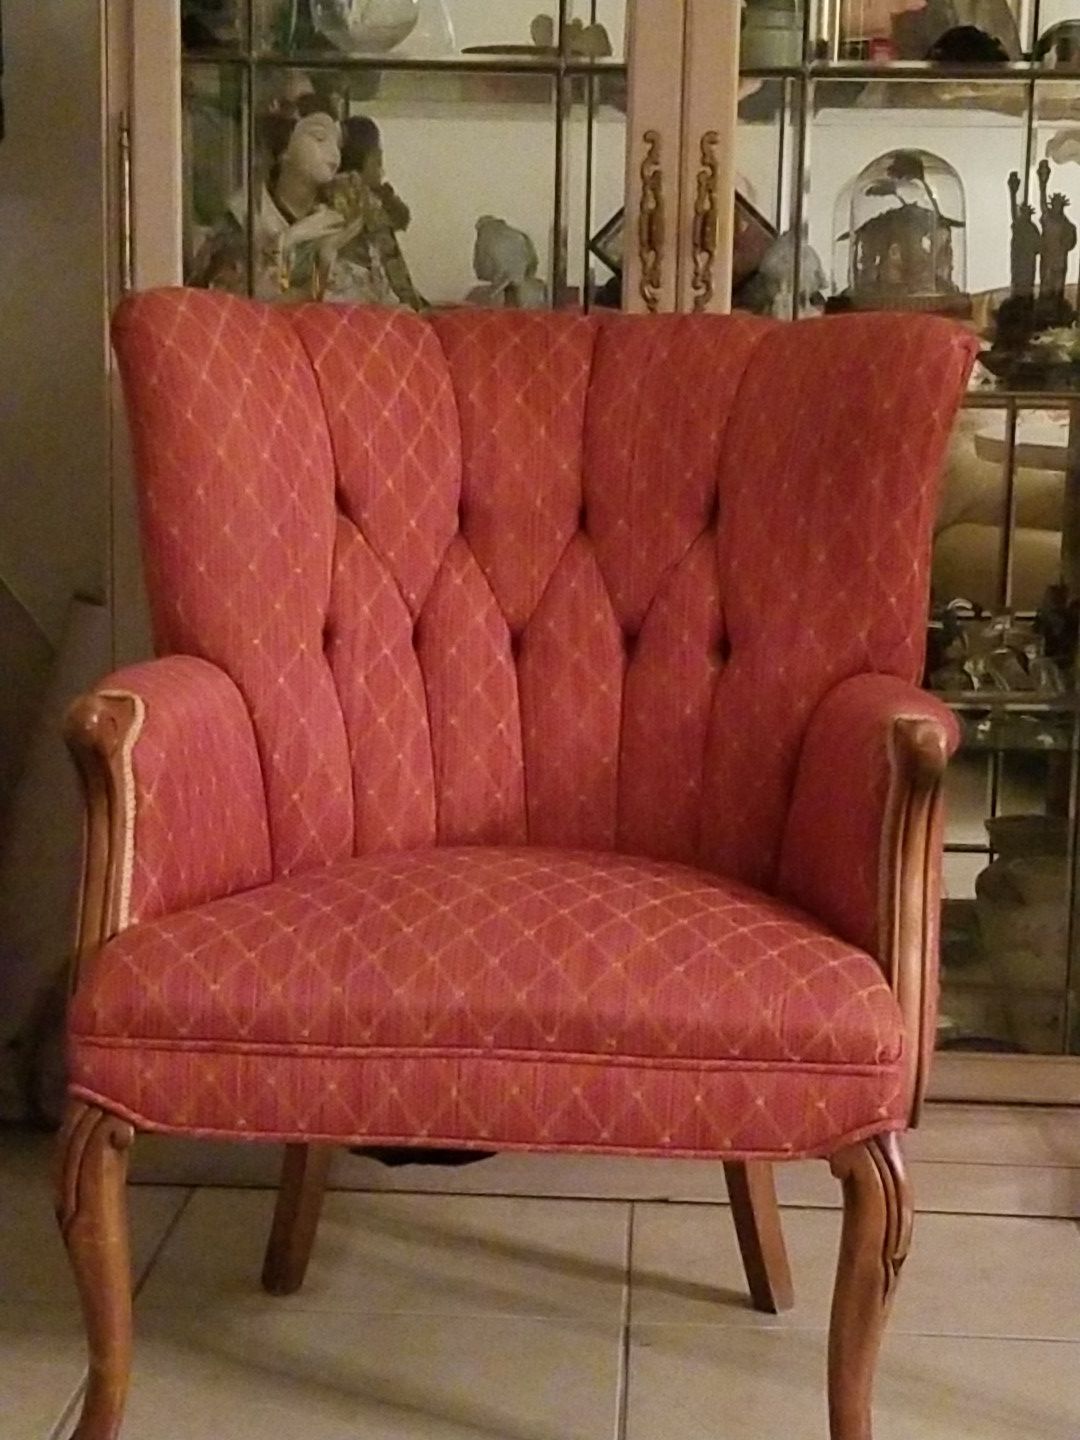 Beautiful antique chair. Was used just for show. Never used.